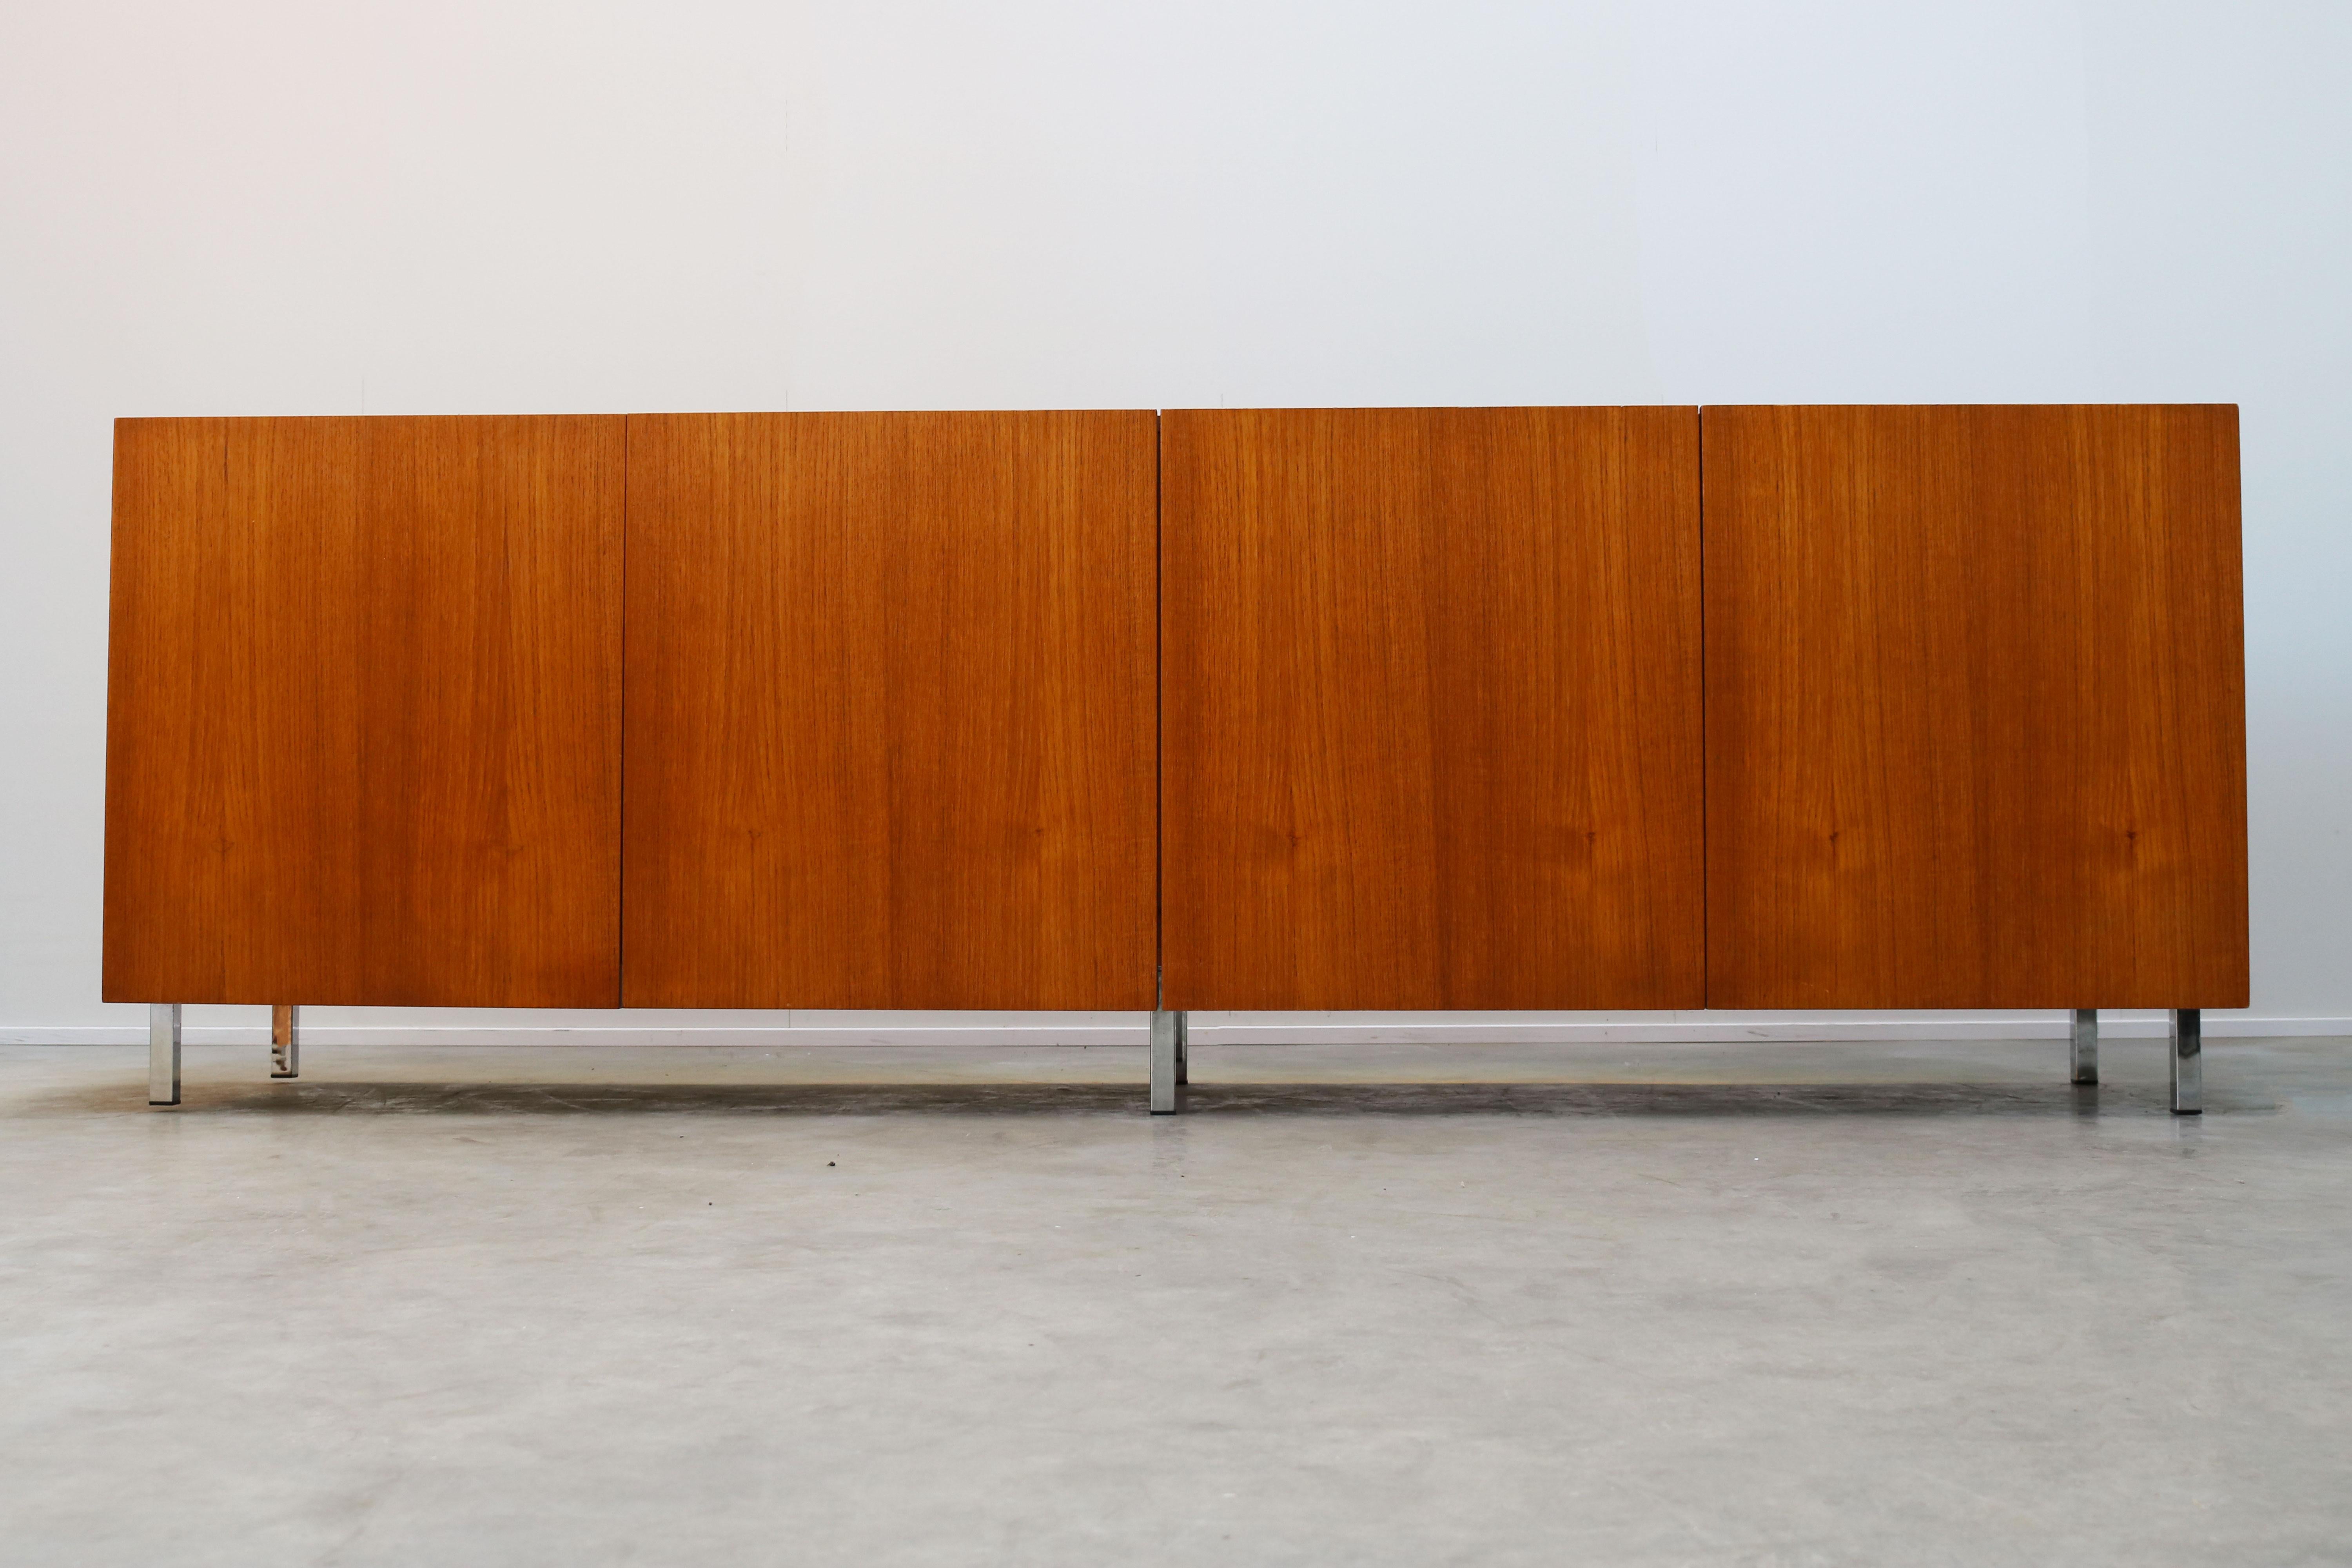 Minimalist Danish sideboard / credenza in teak with chrome legs made in the 1950s. Wonderful clean modern design. The sideboard has 2 shelves and plenty of storage space. Sideboard is in great vintage condition with minor traces of use.